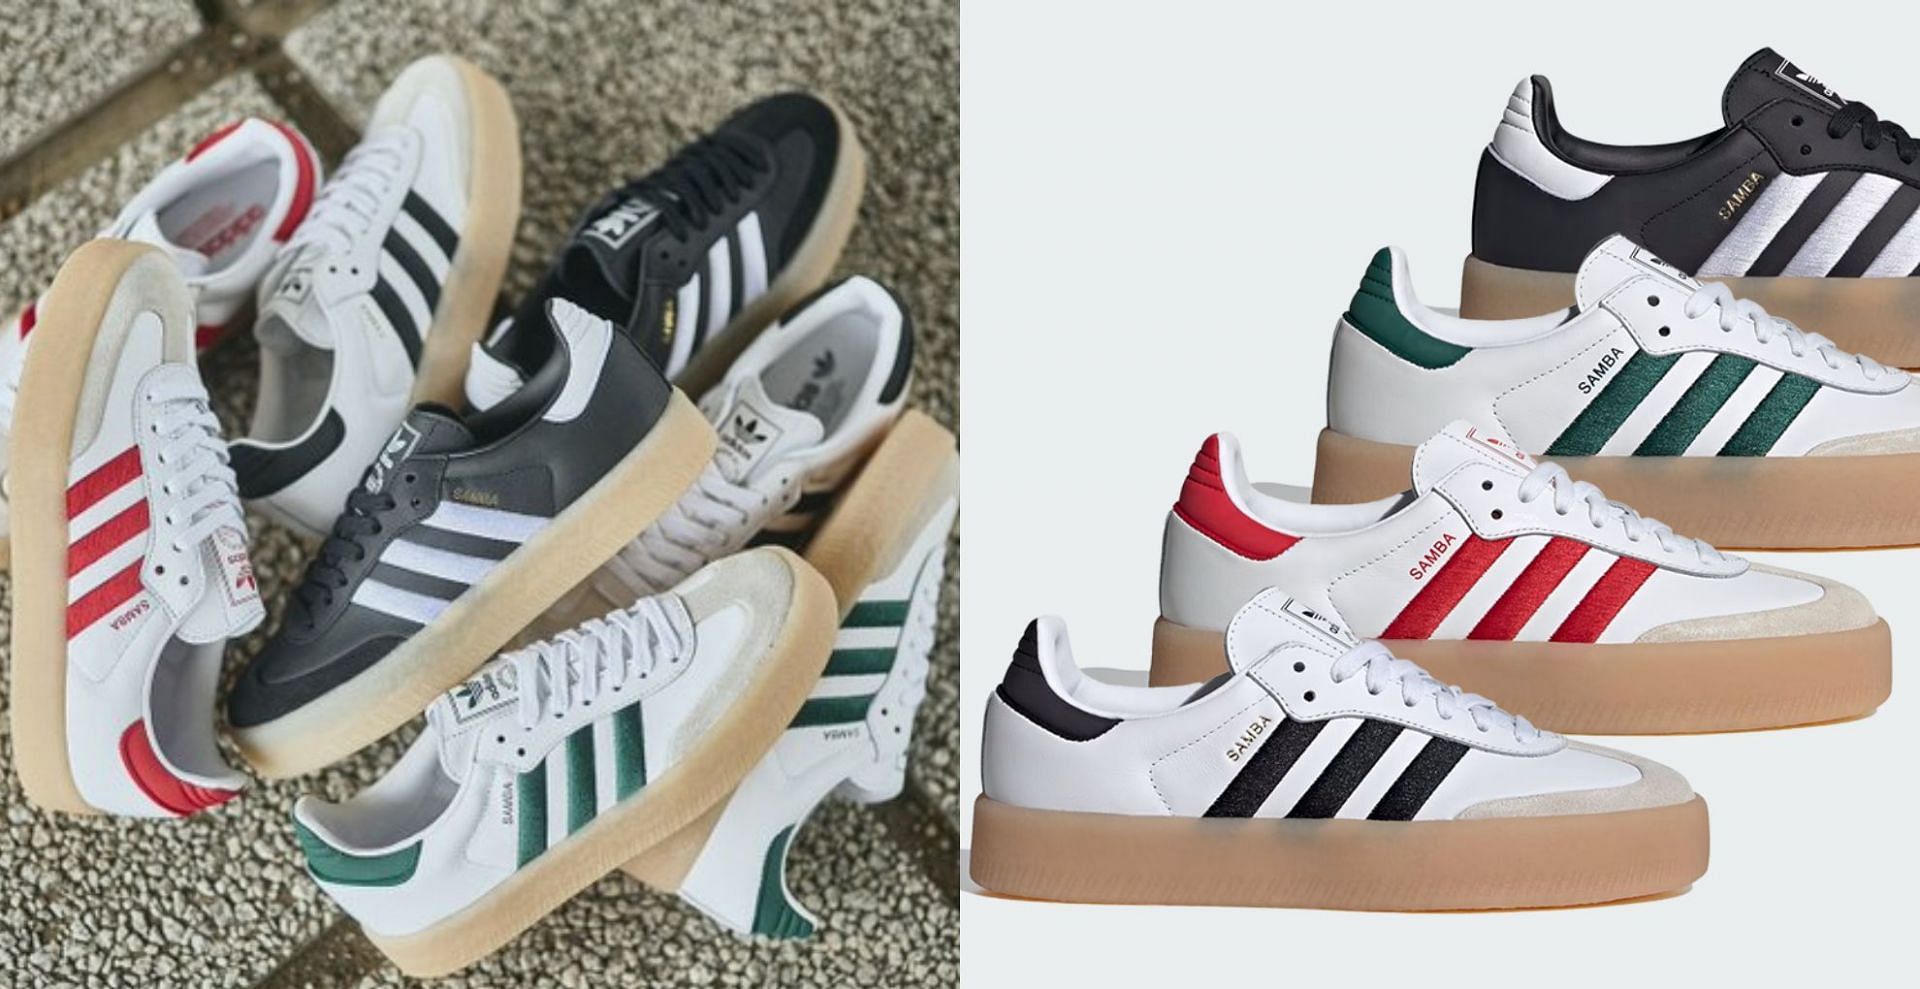 Adidas Sambae Sneaker pack: Where to get, release date, price and more ...